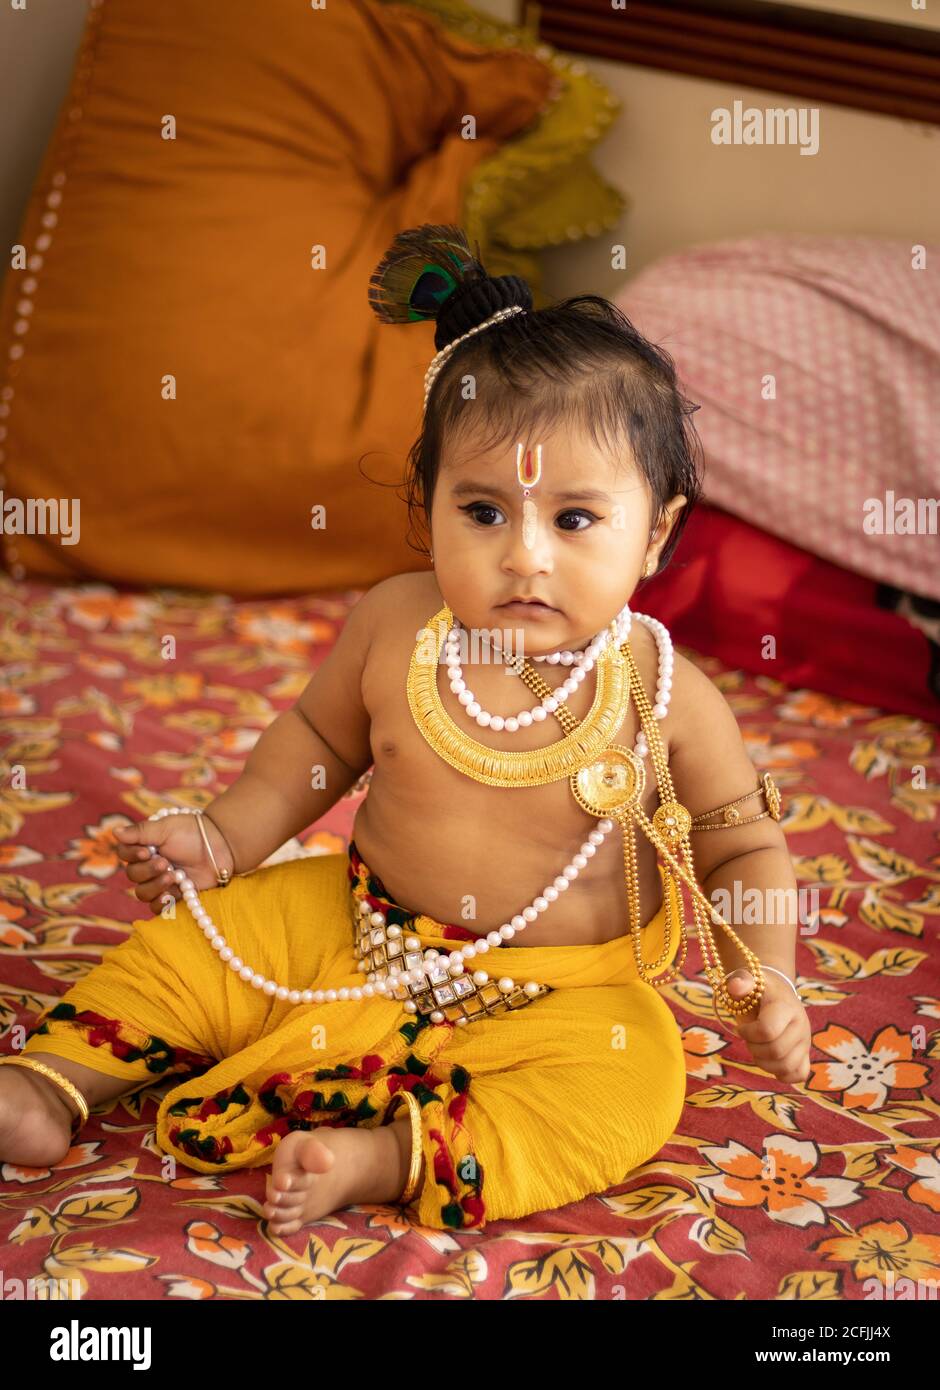 Cute baby dressed up like lord krishna/gopal in the occasion of ...